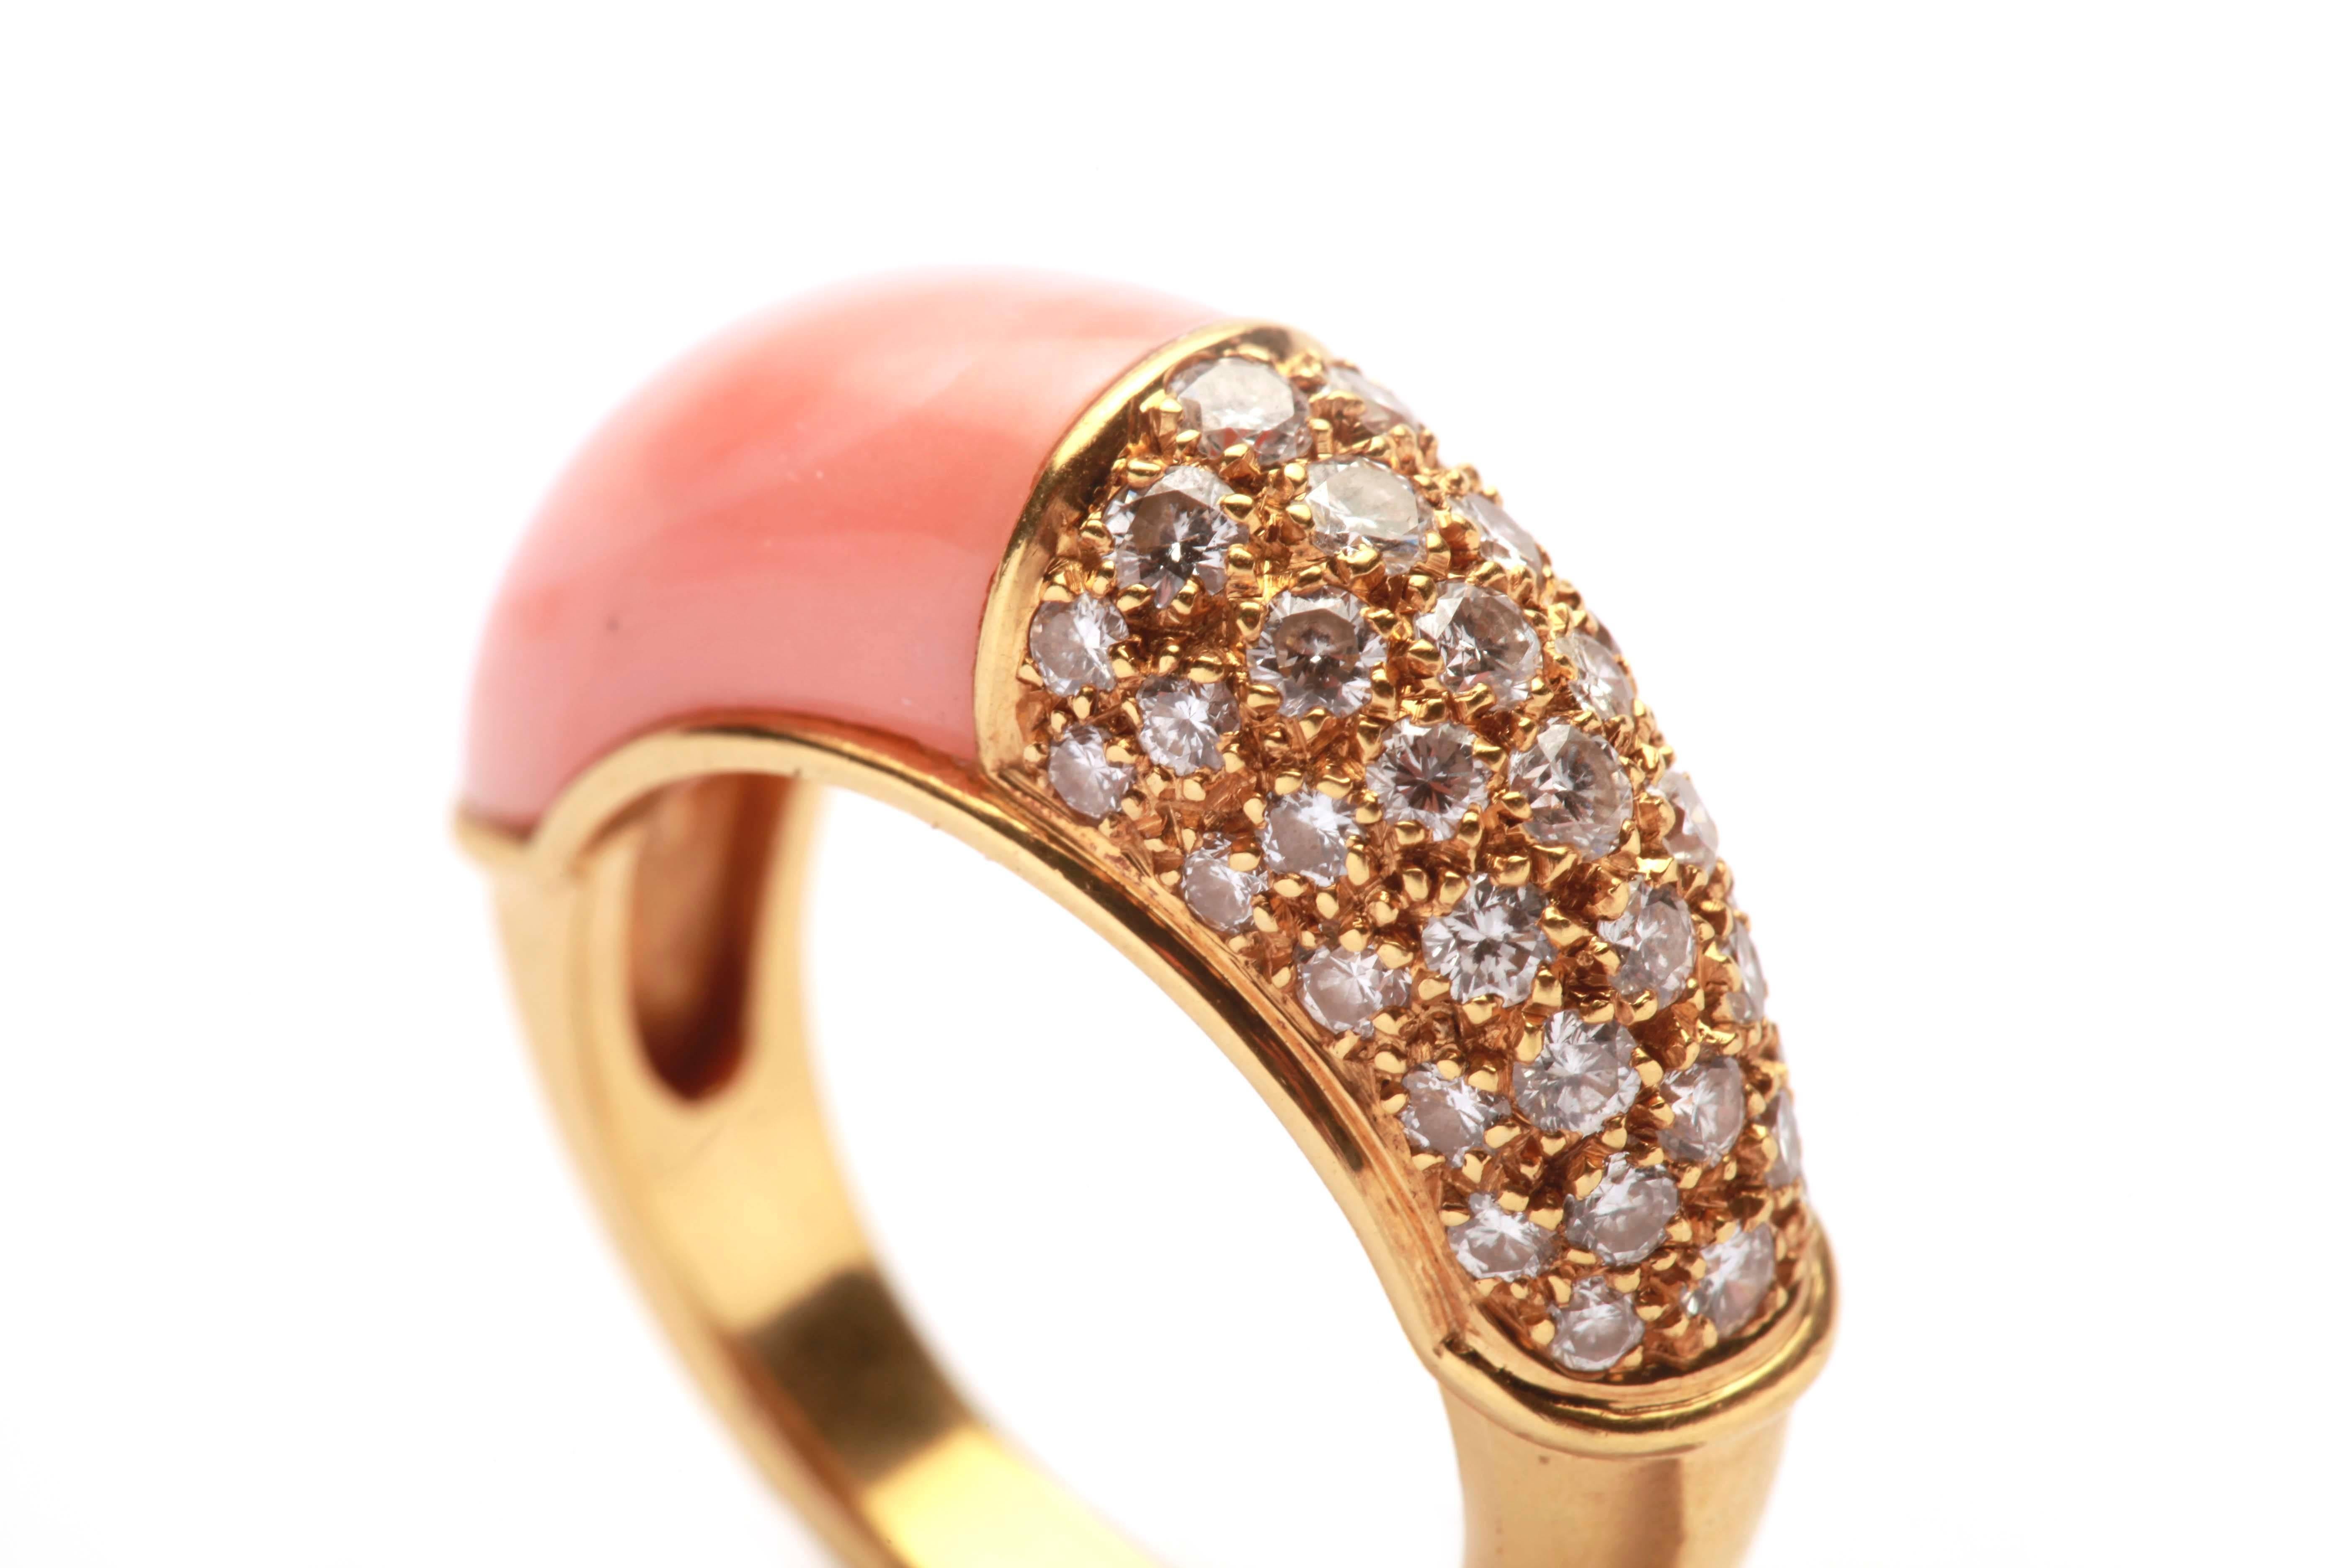 A gracious ring in 18kt yellow gold, set with diamond pavè and pink coral. Made in France, circa 1960.

